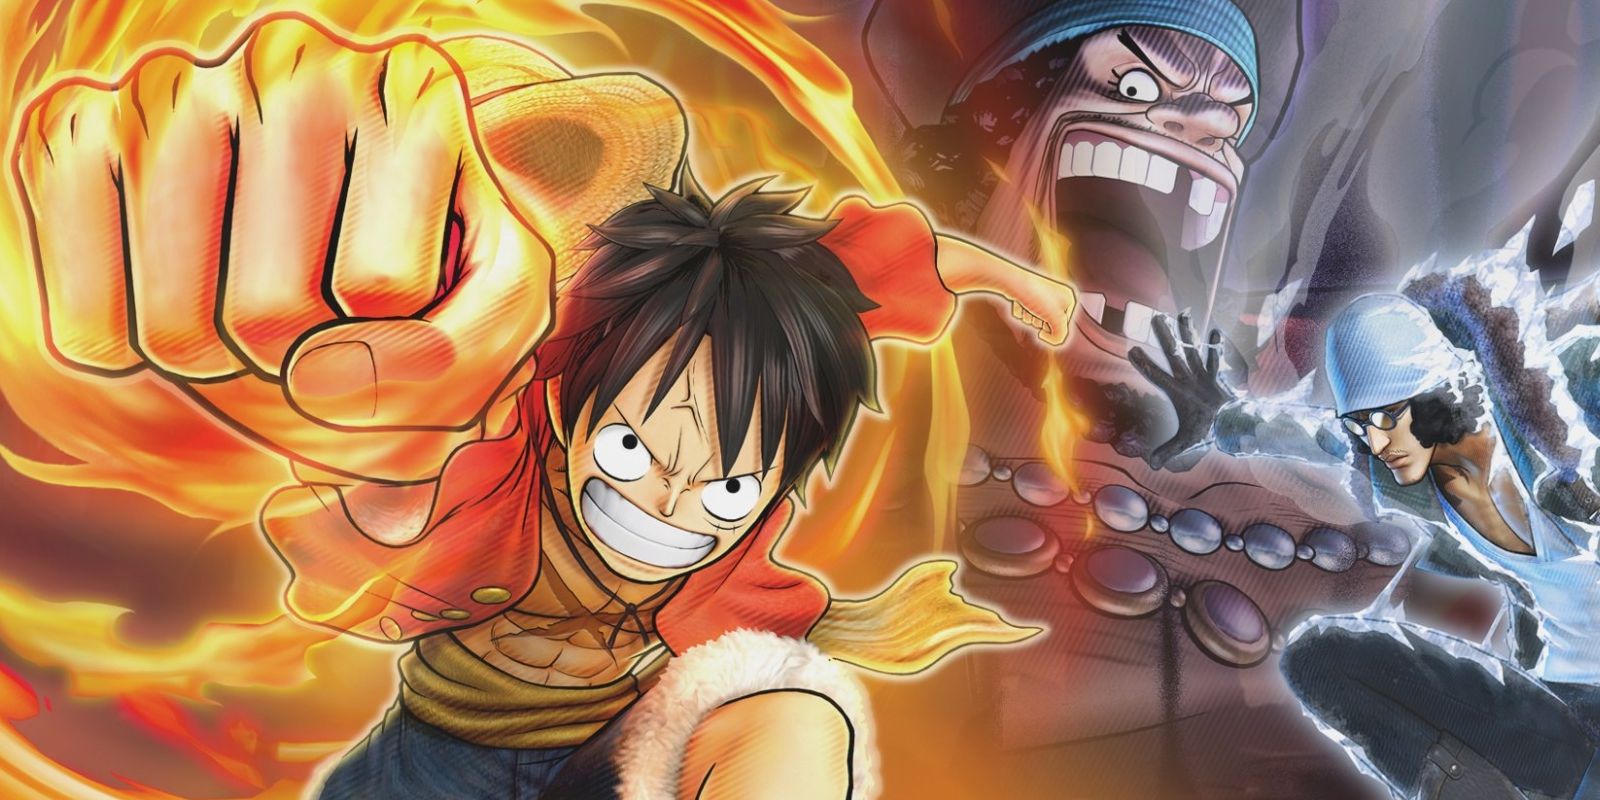 Promo image for One Piece Pirate Warriors 2 shows Luffy charging up a fire fist attack with Blackbeard laughing in the background while Kuzan uses an Ice attack.